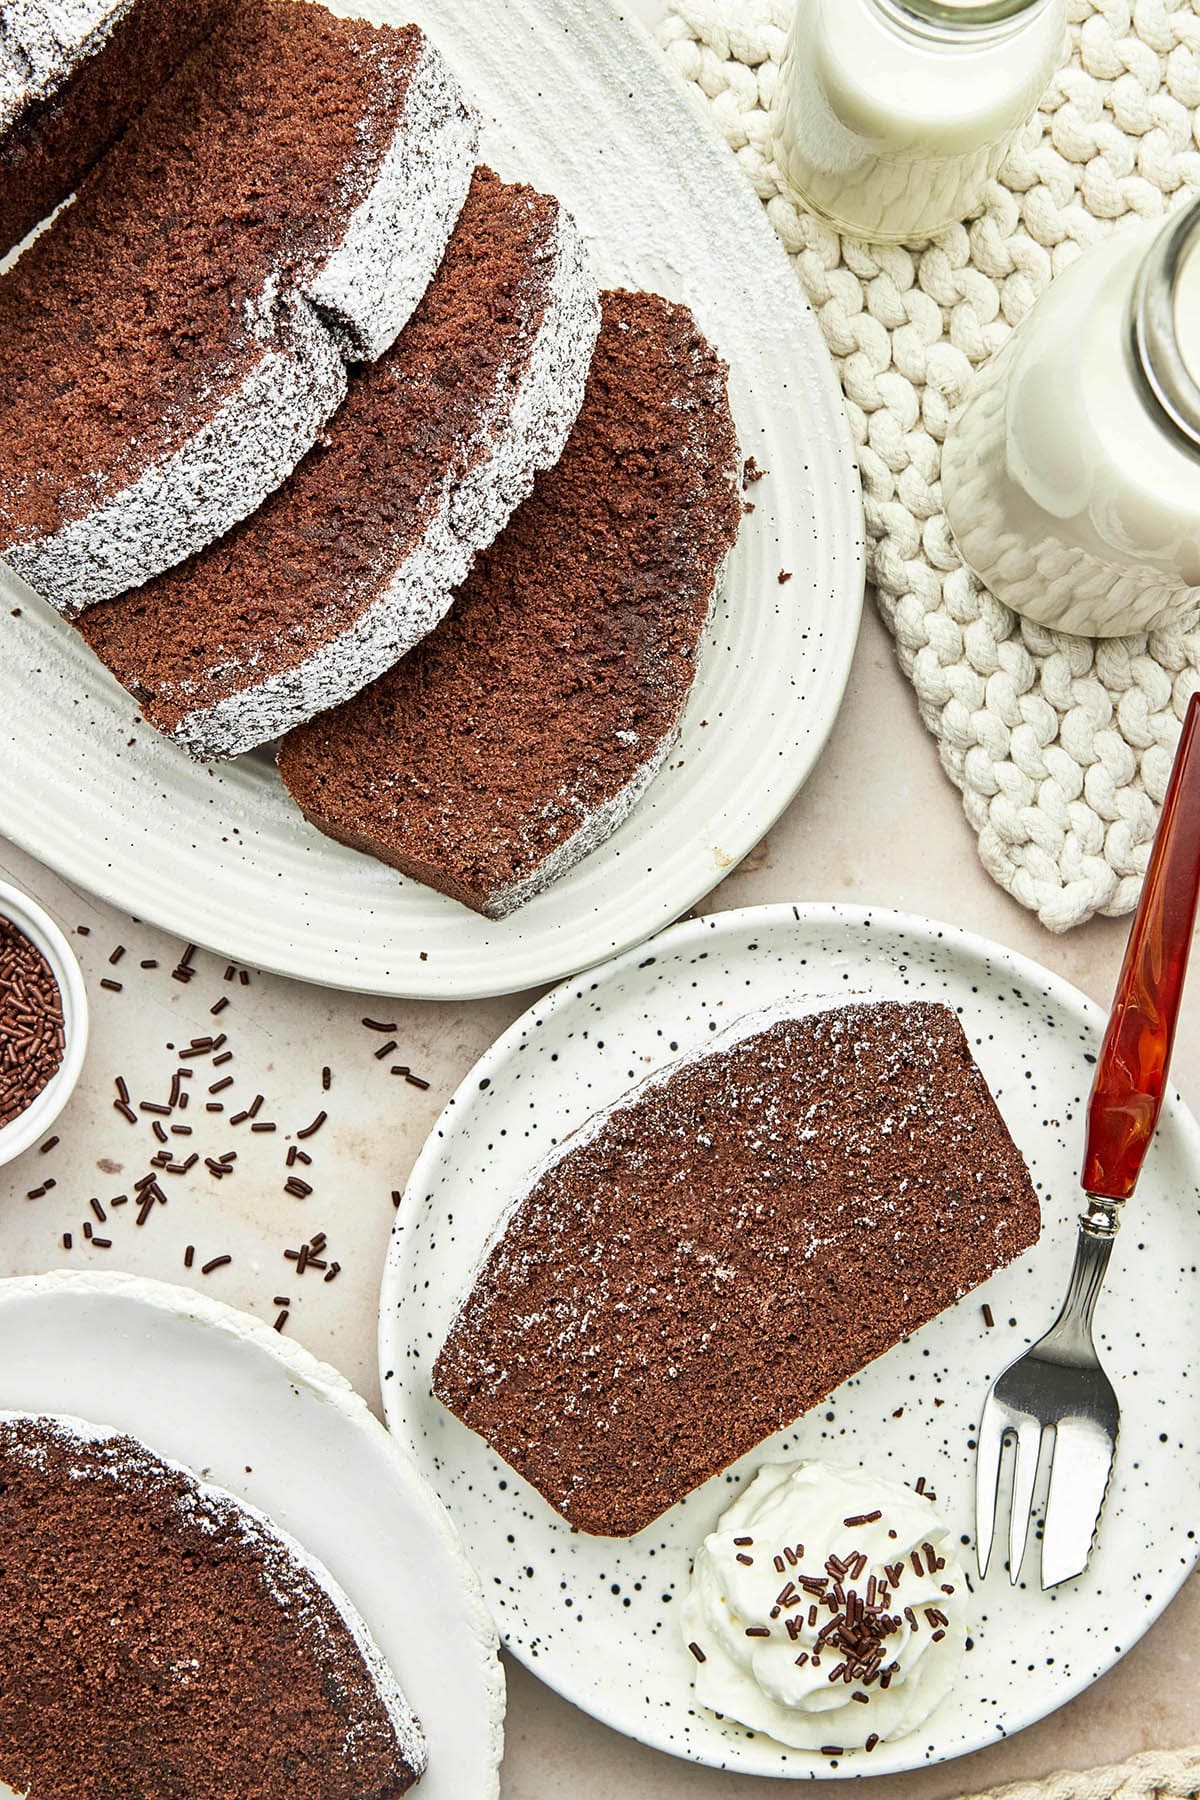 Several slices of chocolate pound cake on a serving platter and plates.